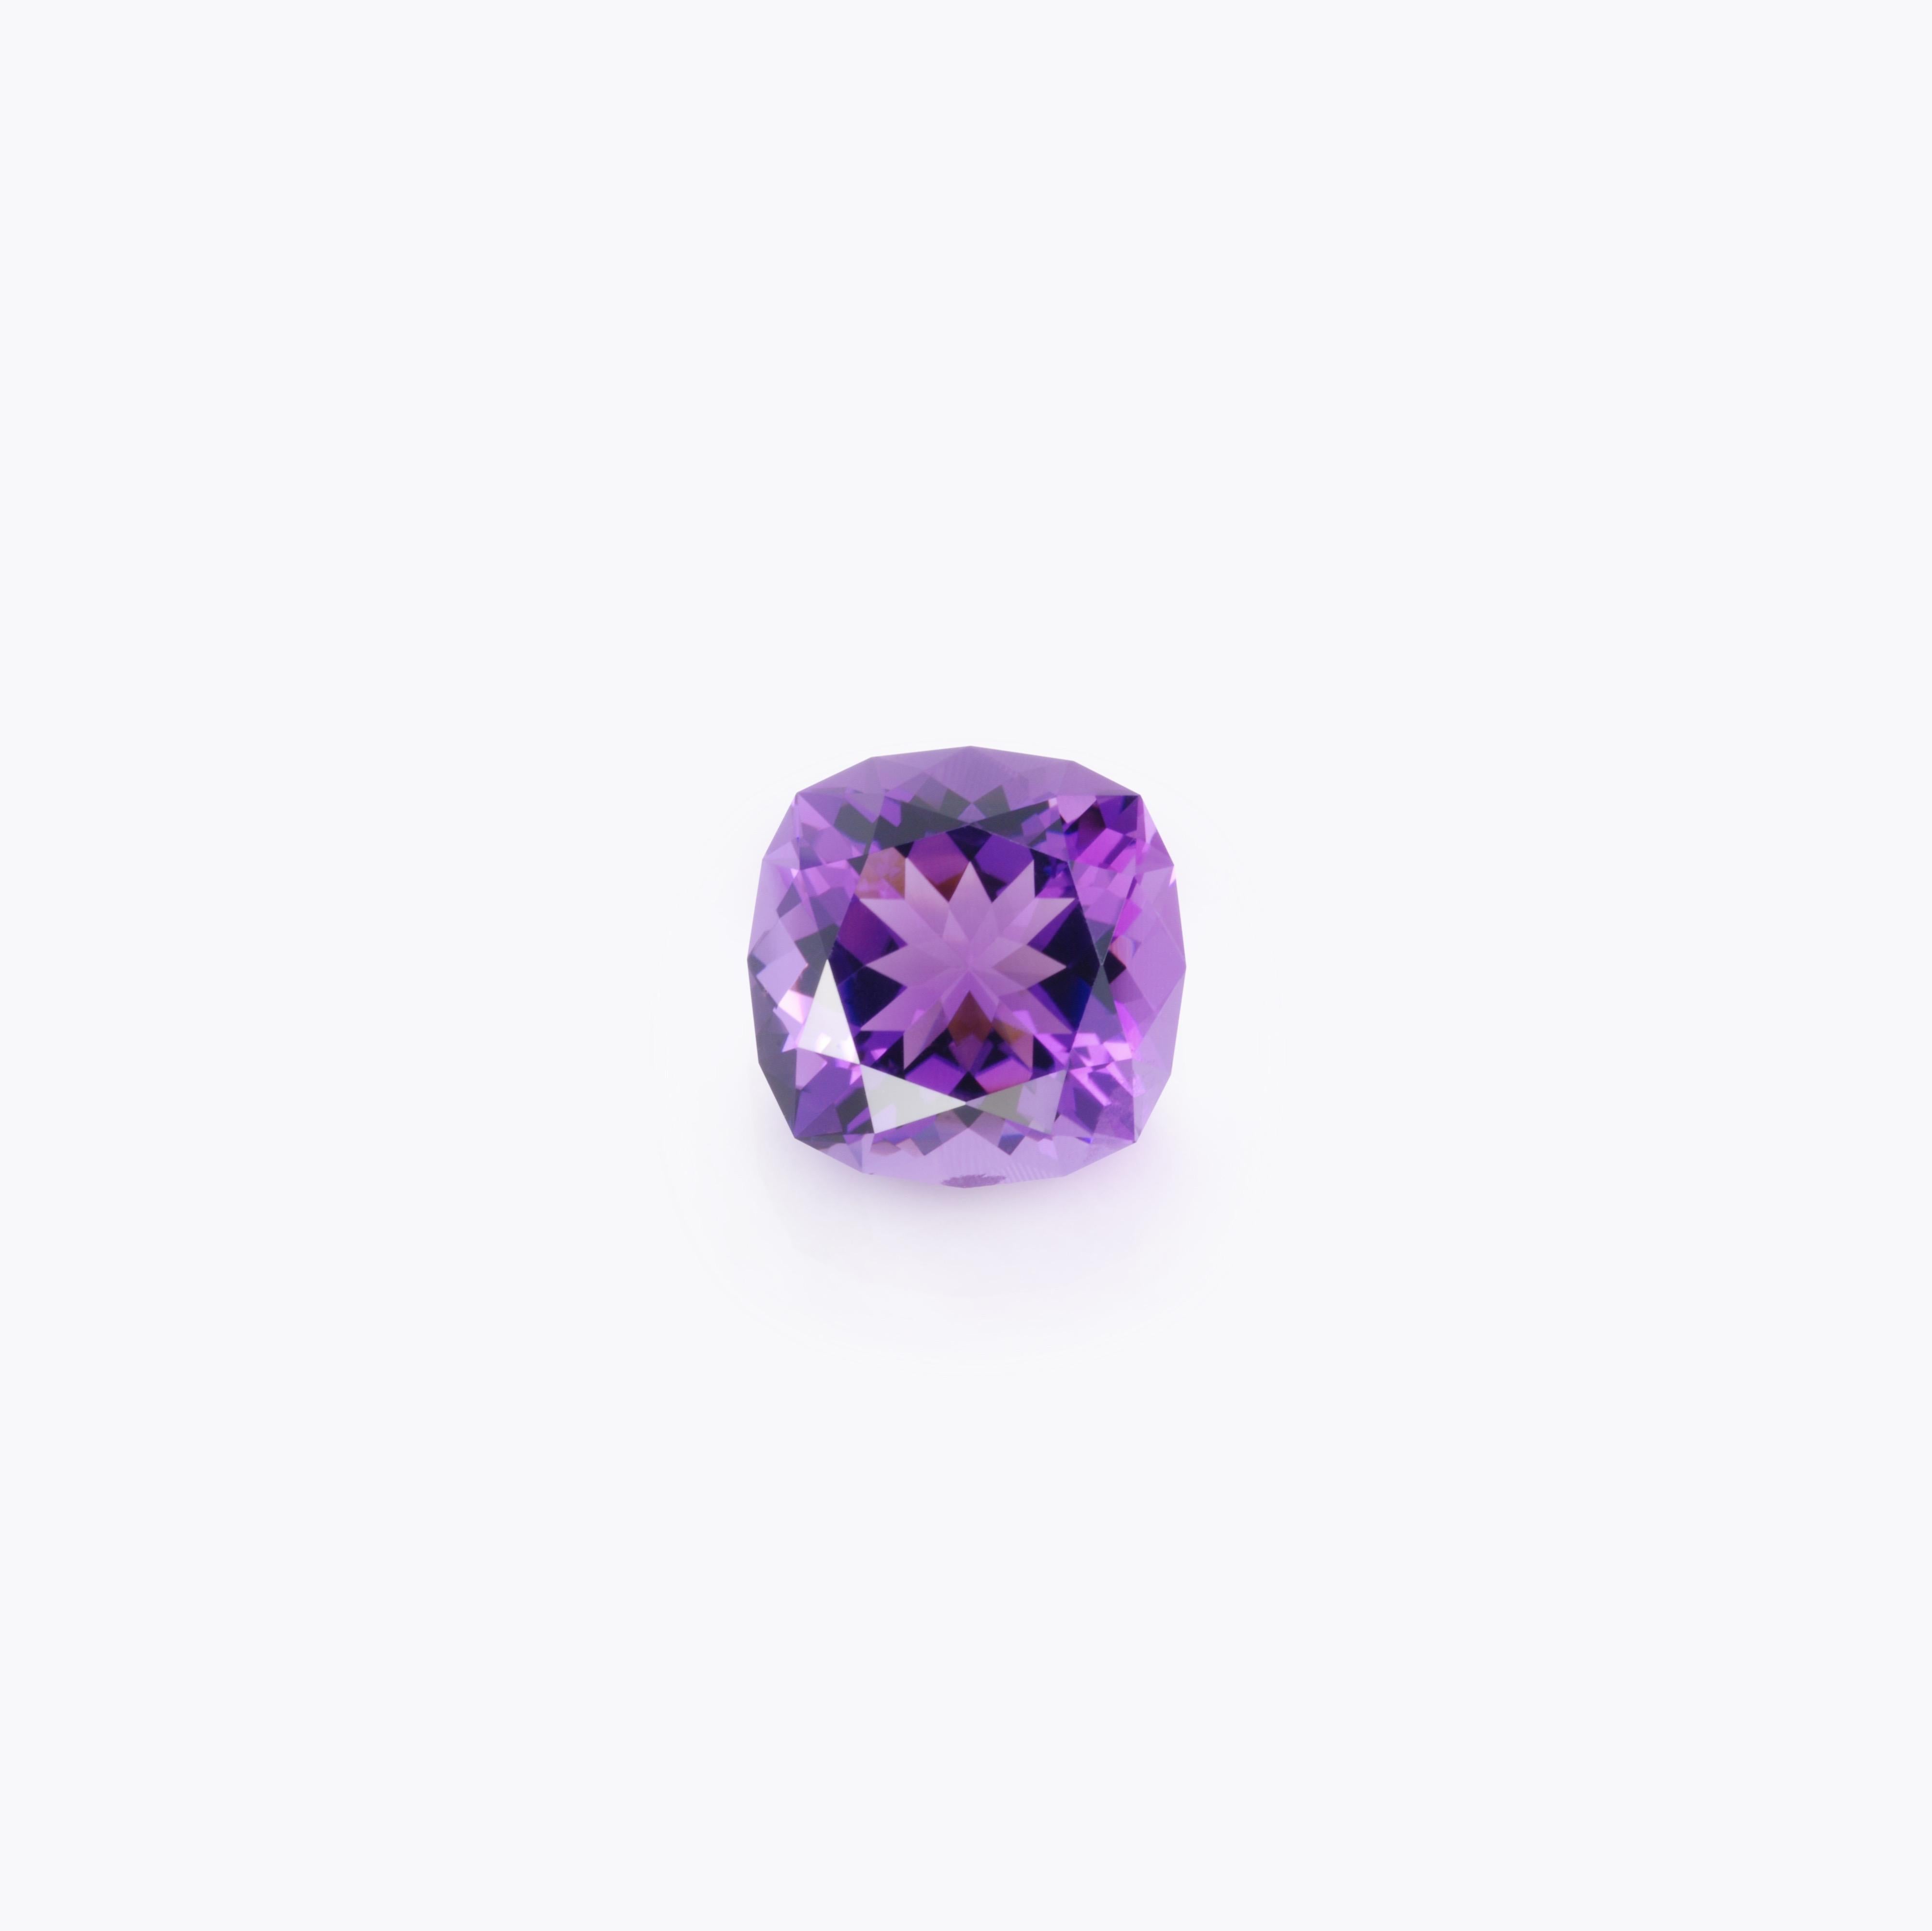 Gorgeous 16.19 carat Brazilian Amethyst square cushion gem, offered loose to a very special lady or gentleman.
Amethyst dimensions: 16.50mm x 16.50mm x 11.00mm.
Returns are accepted and paid by us within 7 days of delivery.
We offer supreme custom